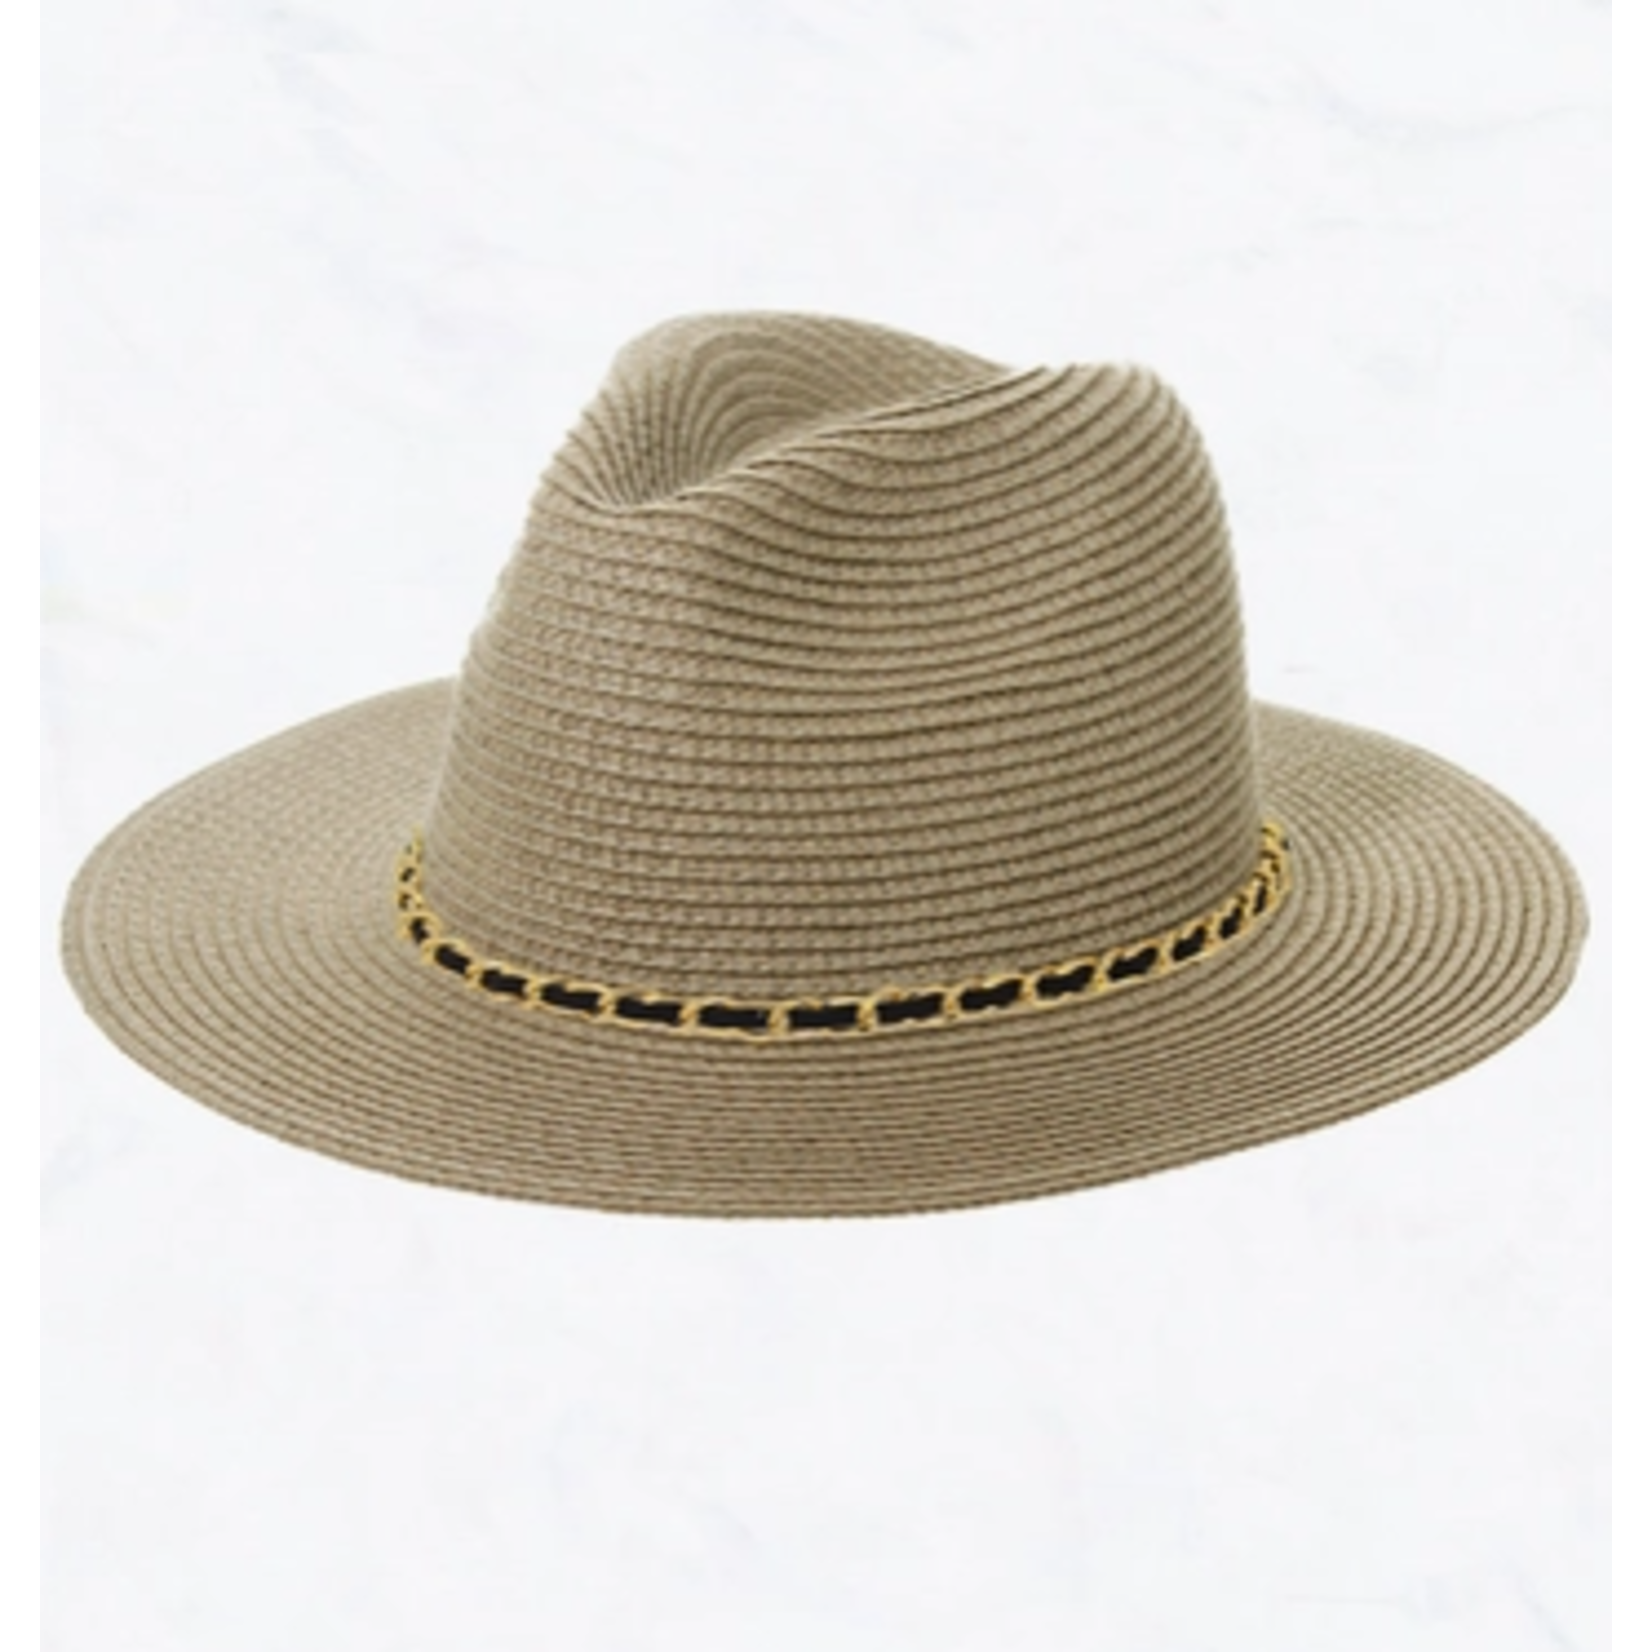 Suzie Q SQ Chained Leather Belt Sunscreen Straw Hat Gray